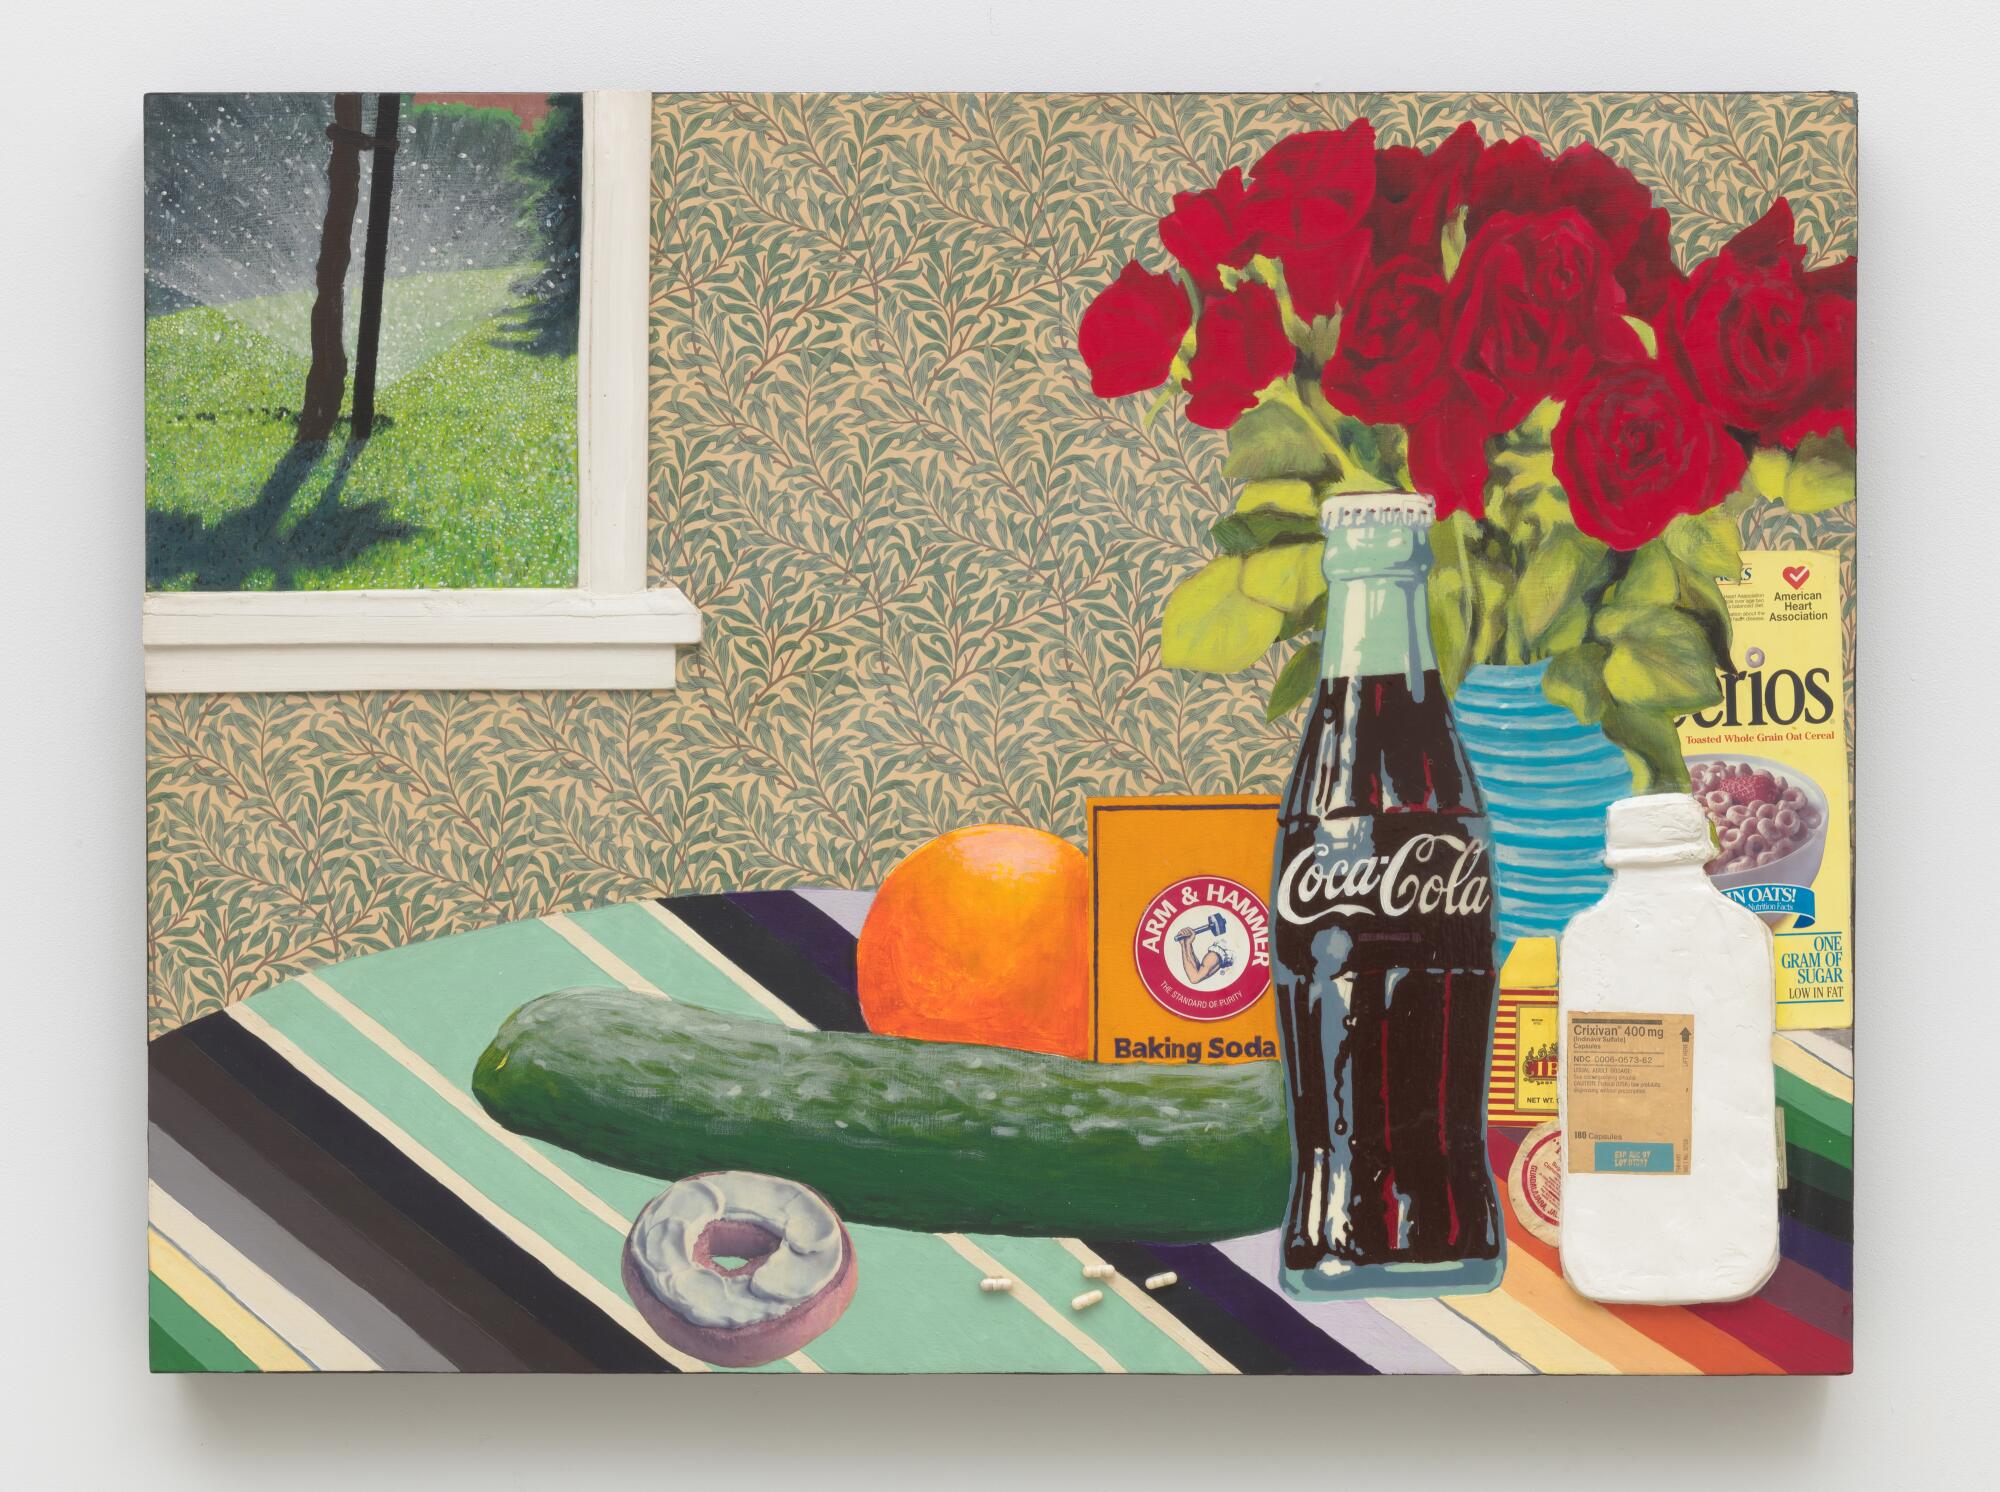 A still life by Joey Terrill shows a glass bottle of Coke, a flower arrangement, a box of Cheerios and white pills on canvas.